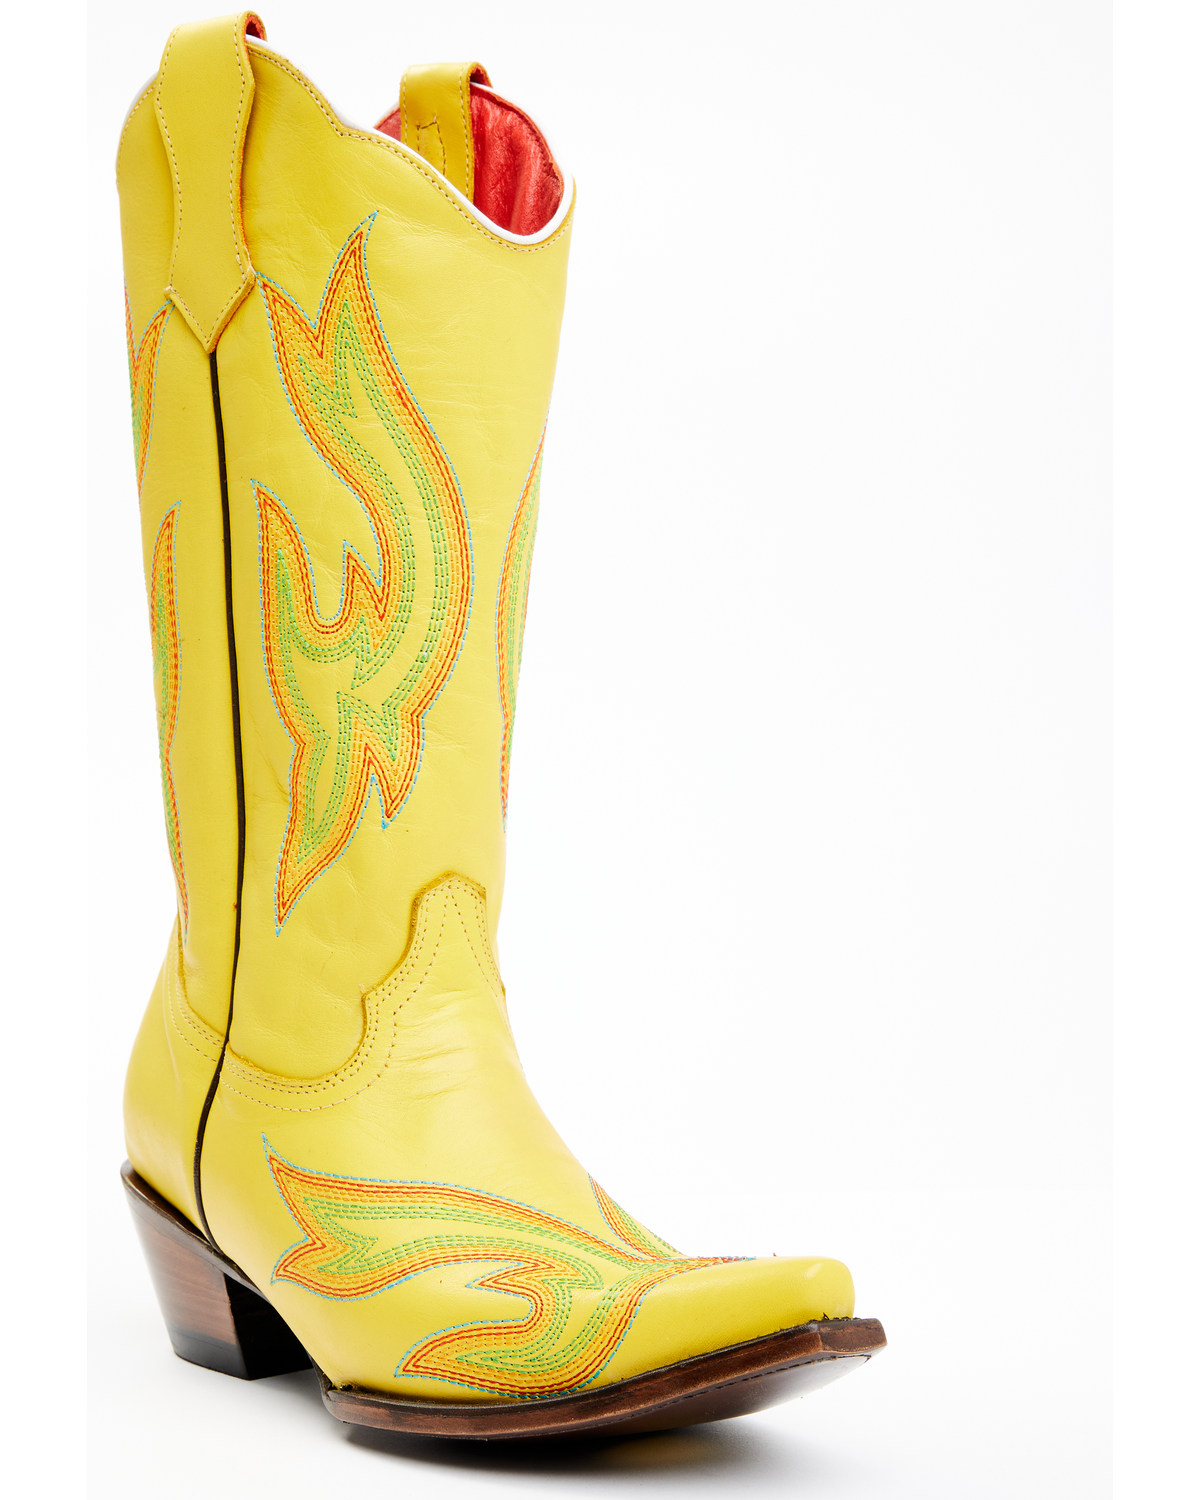 Planet Cowboy Women's Psychedelic Original Soft Western Boots - Snip Toe